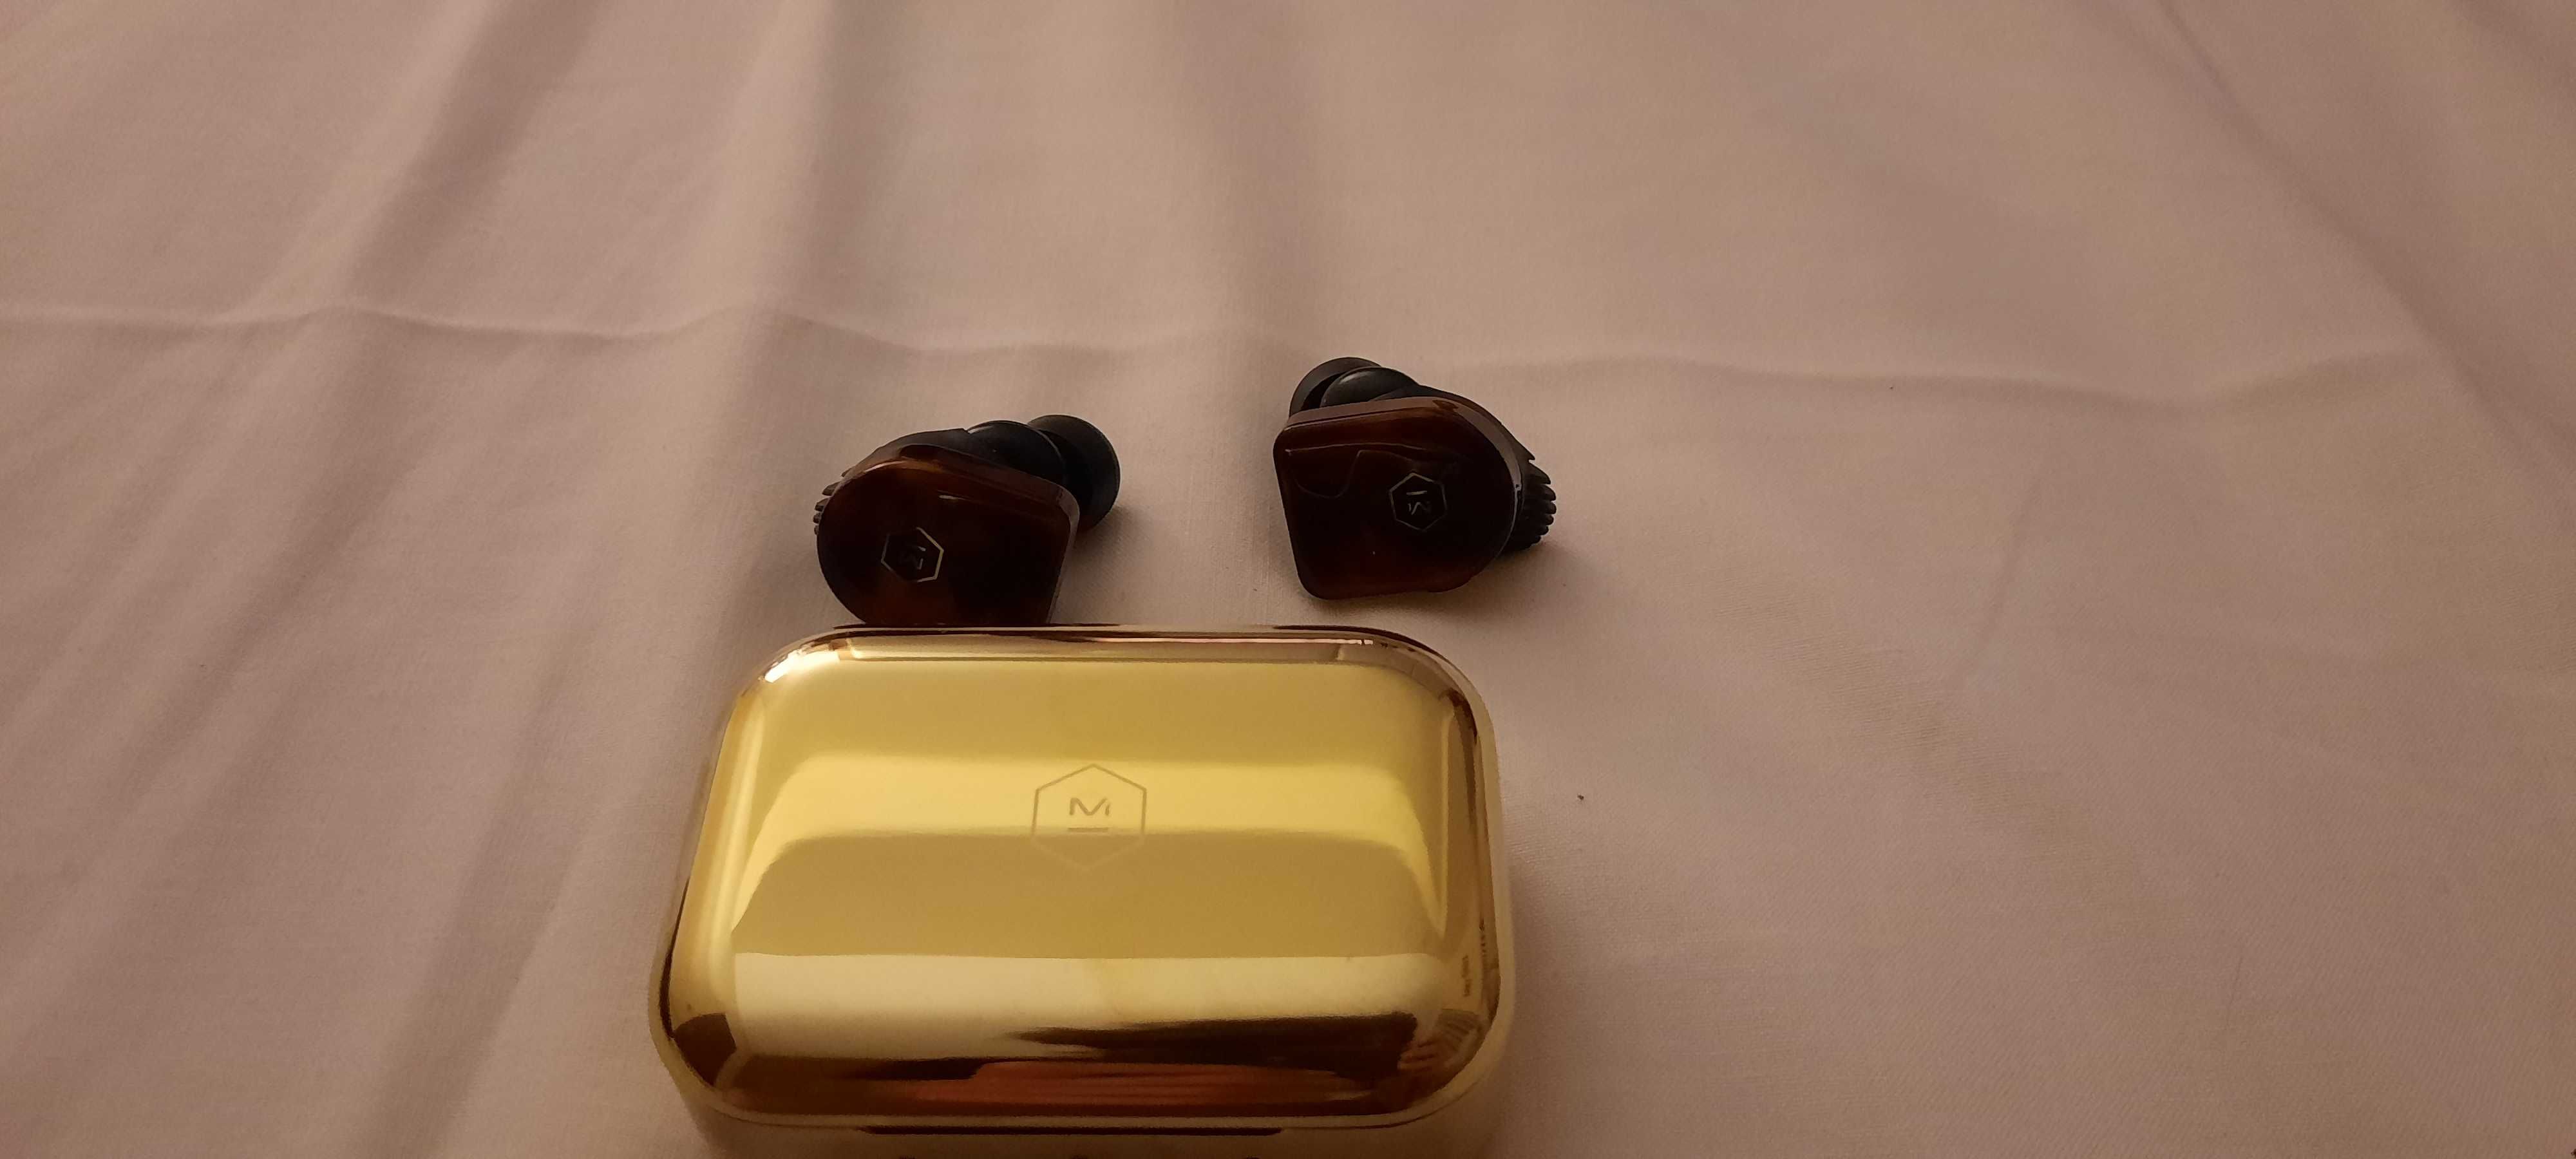 Master and Dynamic MW07 Plus tortoise shell earbuds